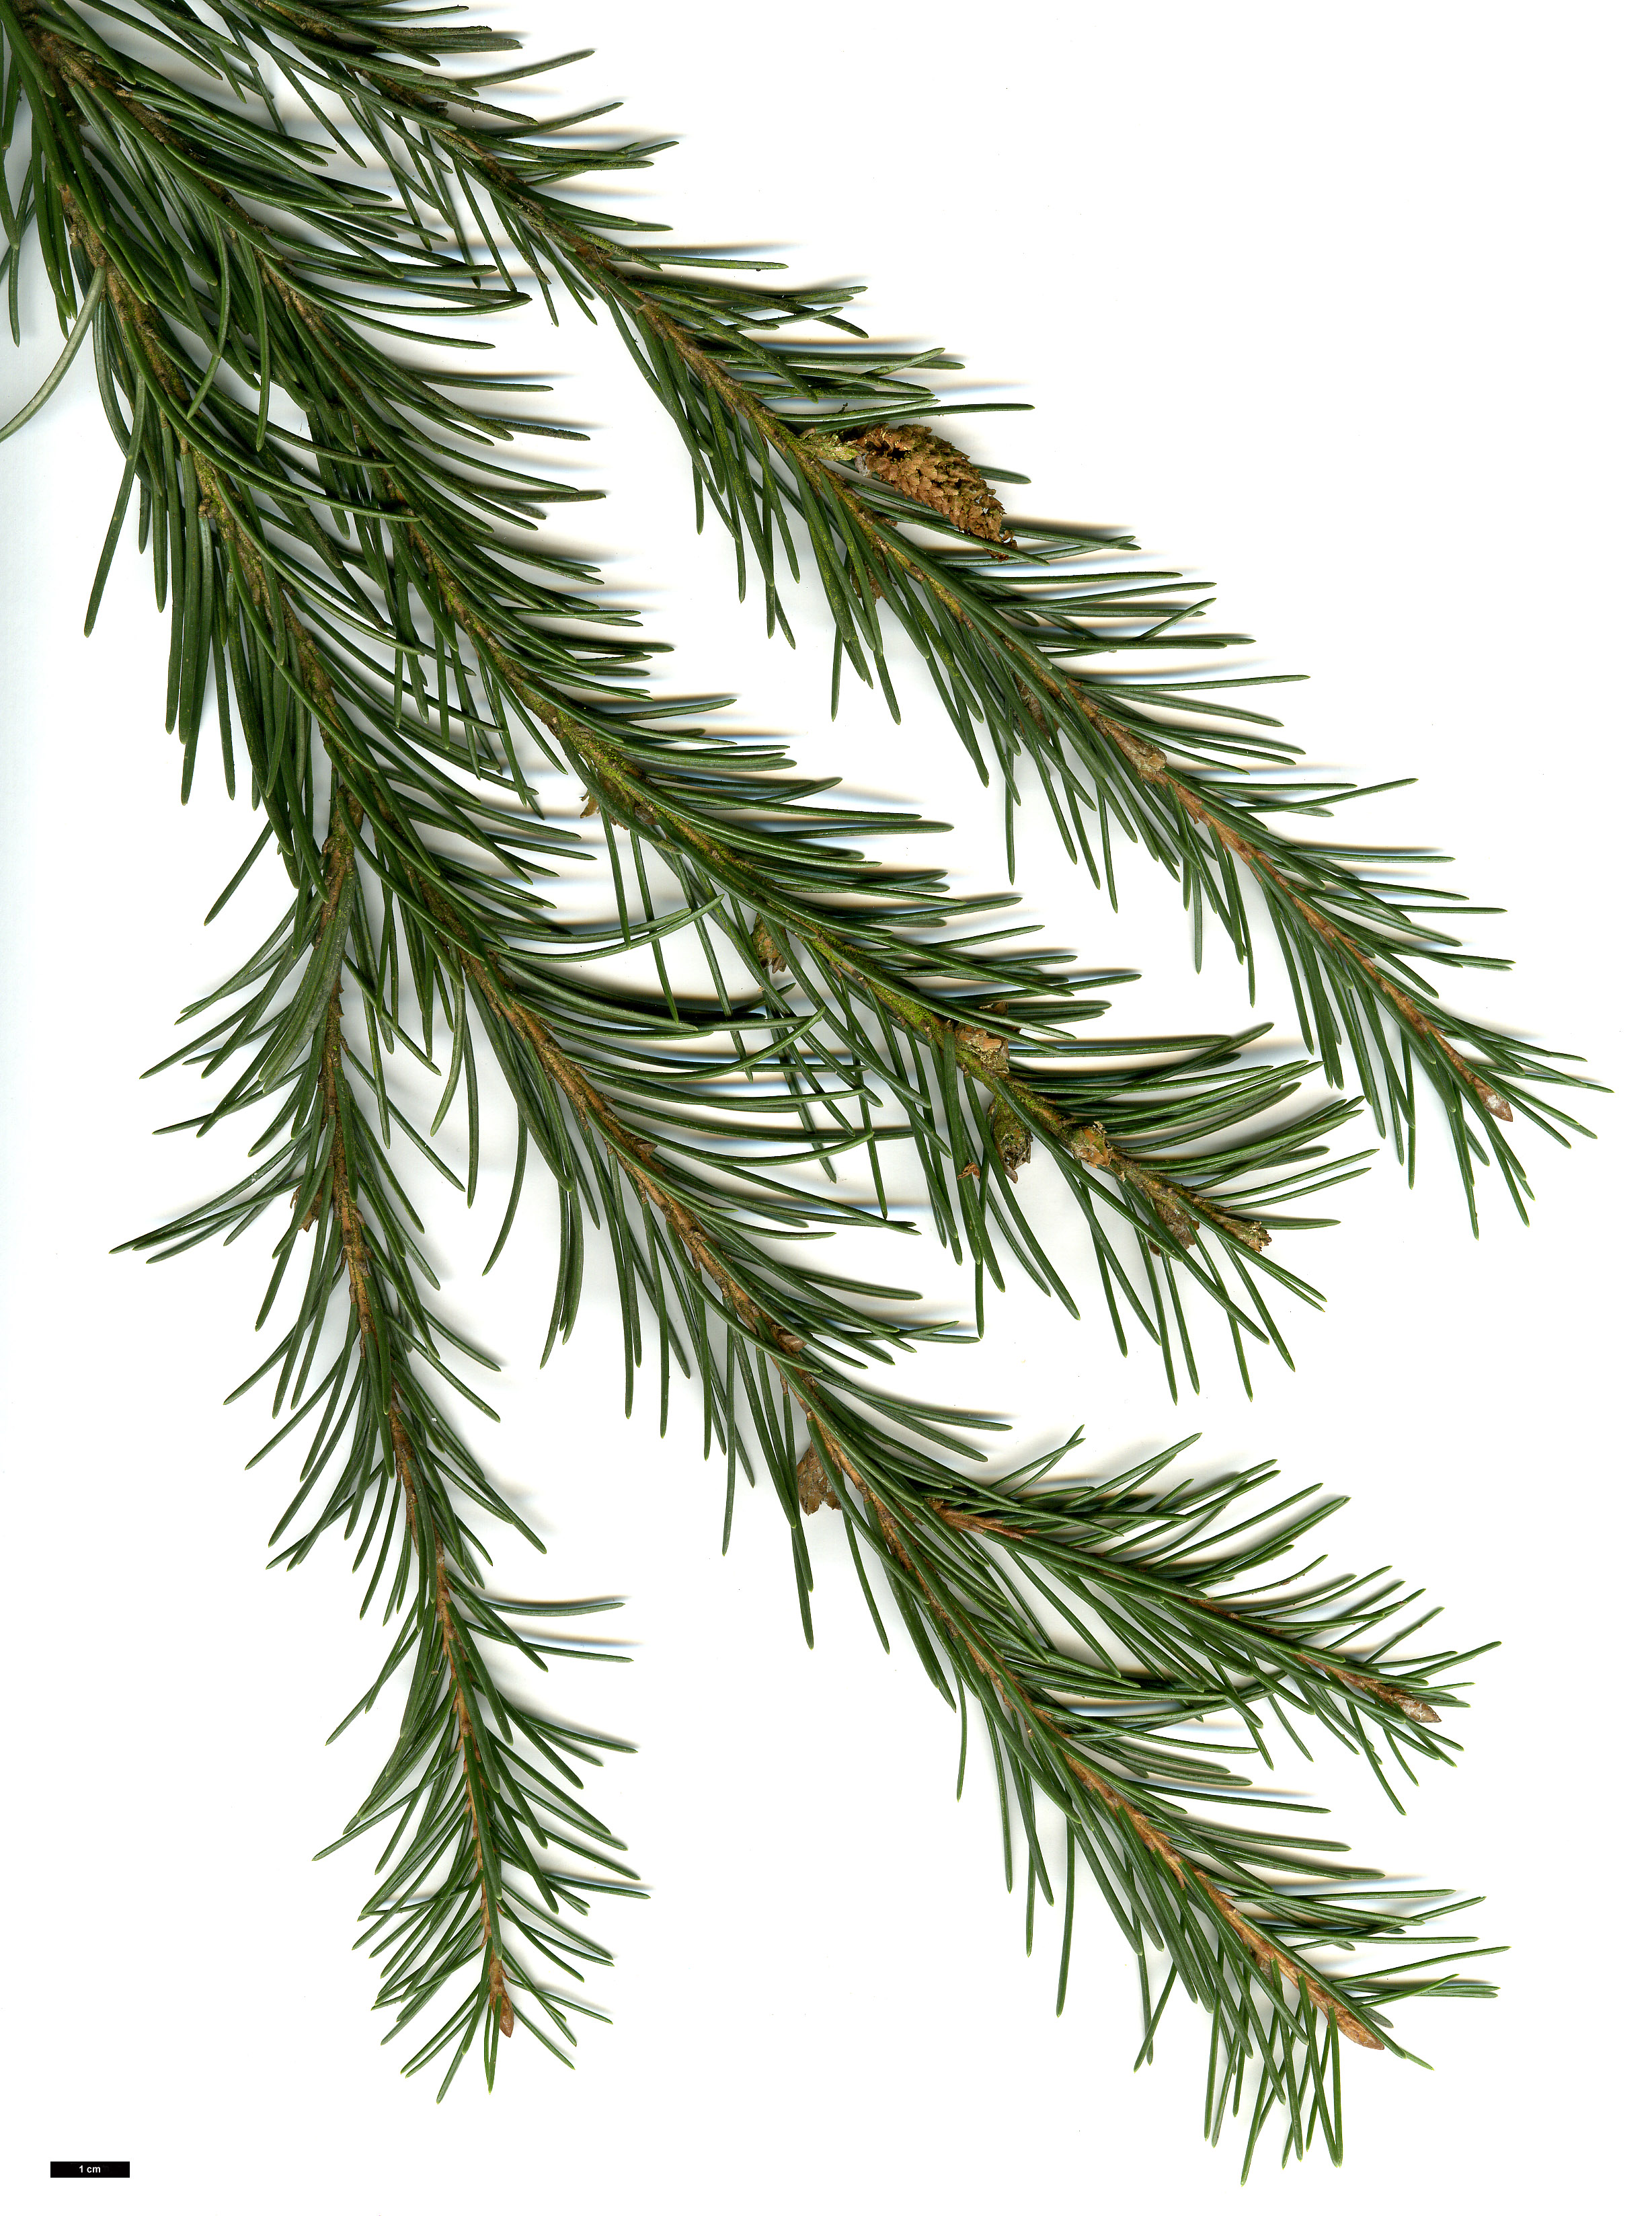 High resolution image: Family: Pinaceae - Genus: Picea - Taxon: breweriana